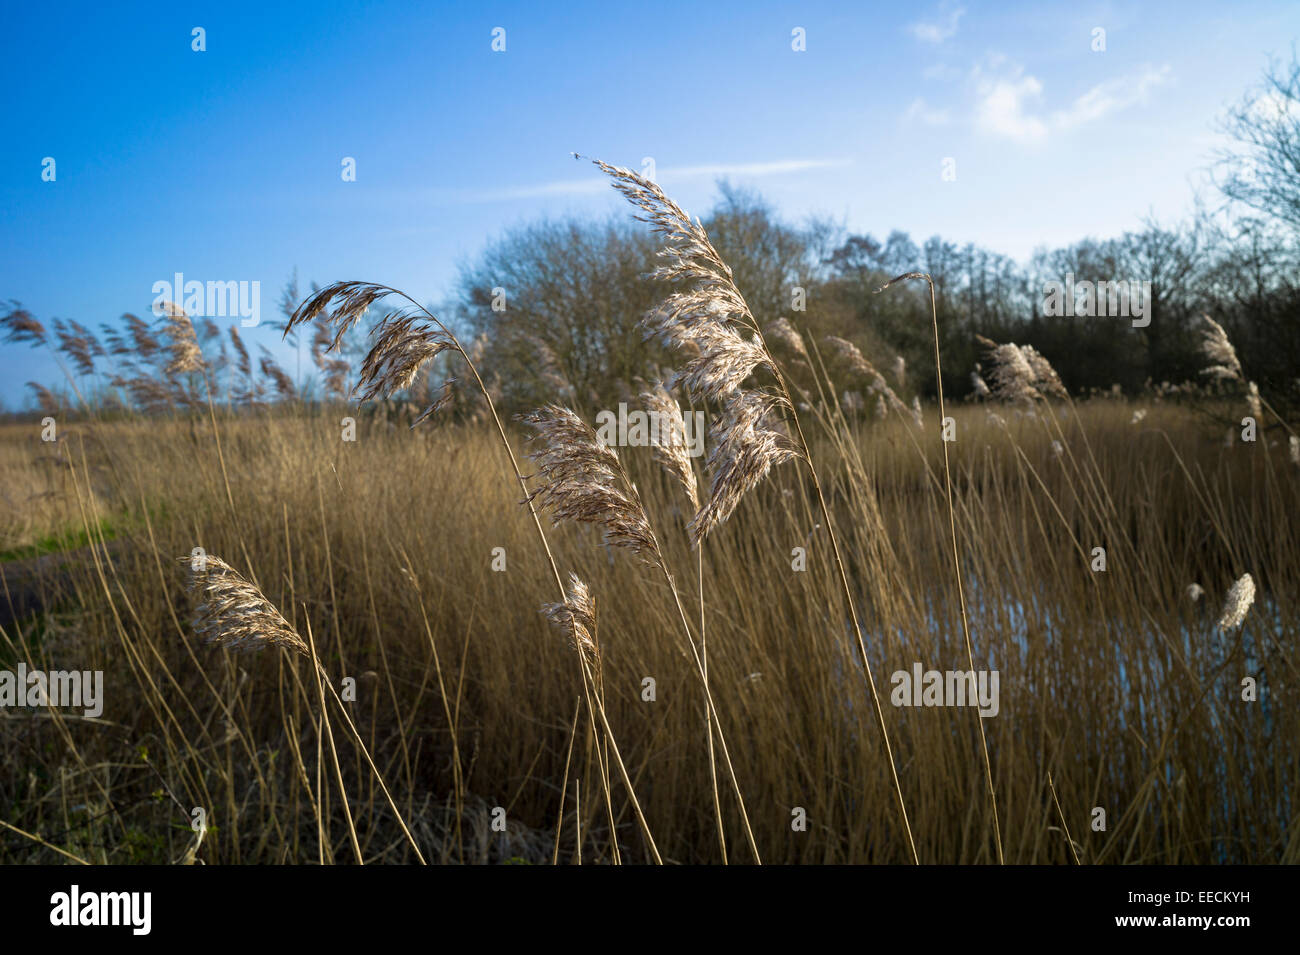 Grasses and reeds in a reedbed by the marshes of The Somerset Levels Nature Reserve in Southern England, UK Stock Photo